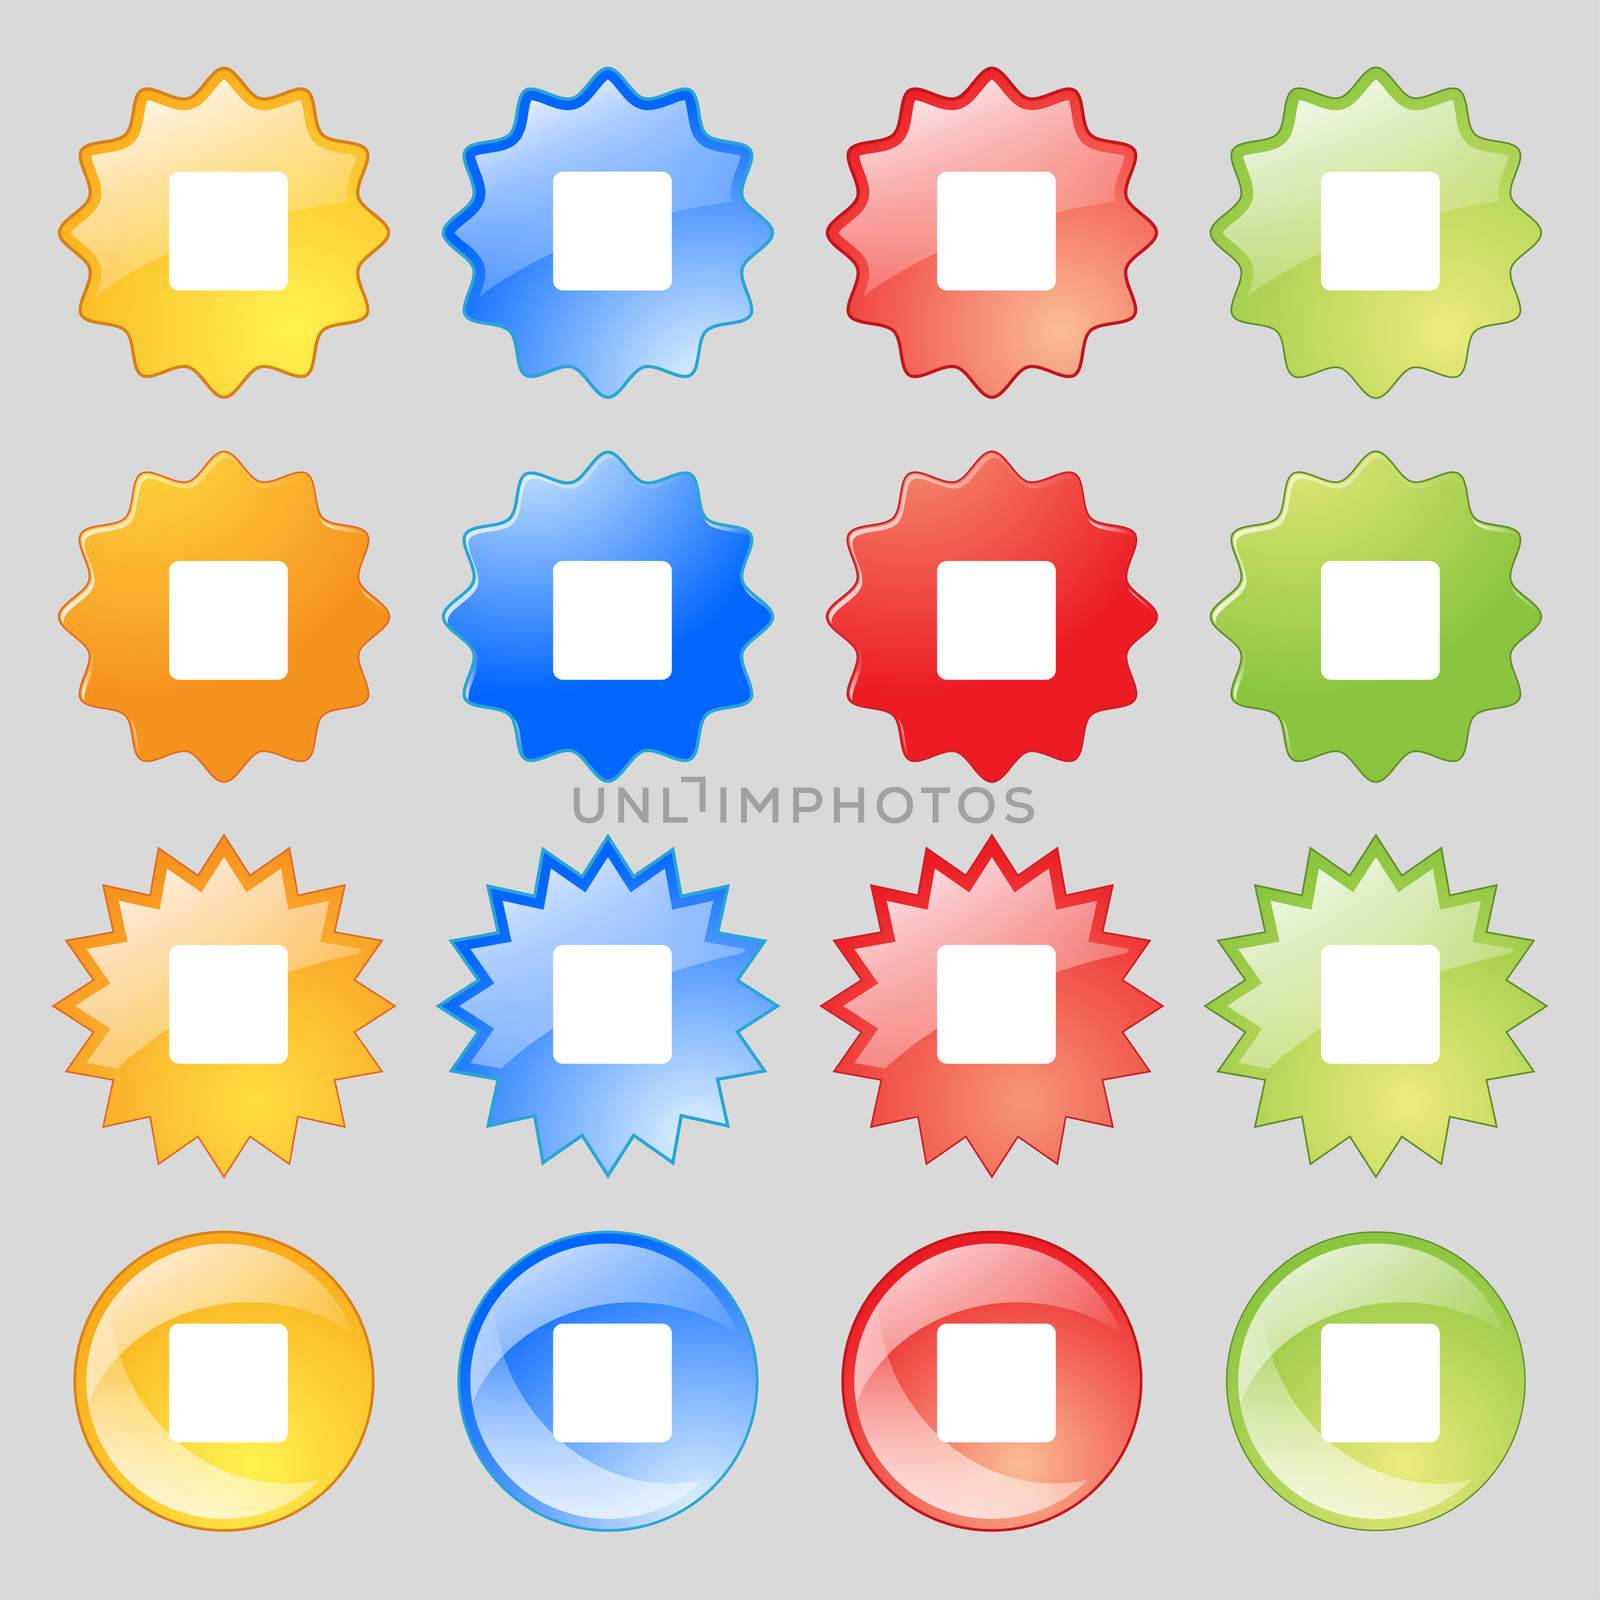 stop button icon sign. Big set of 16 colorful modern buttons for your design. illustration